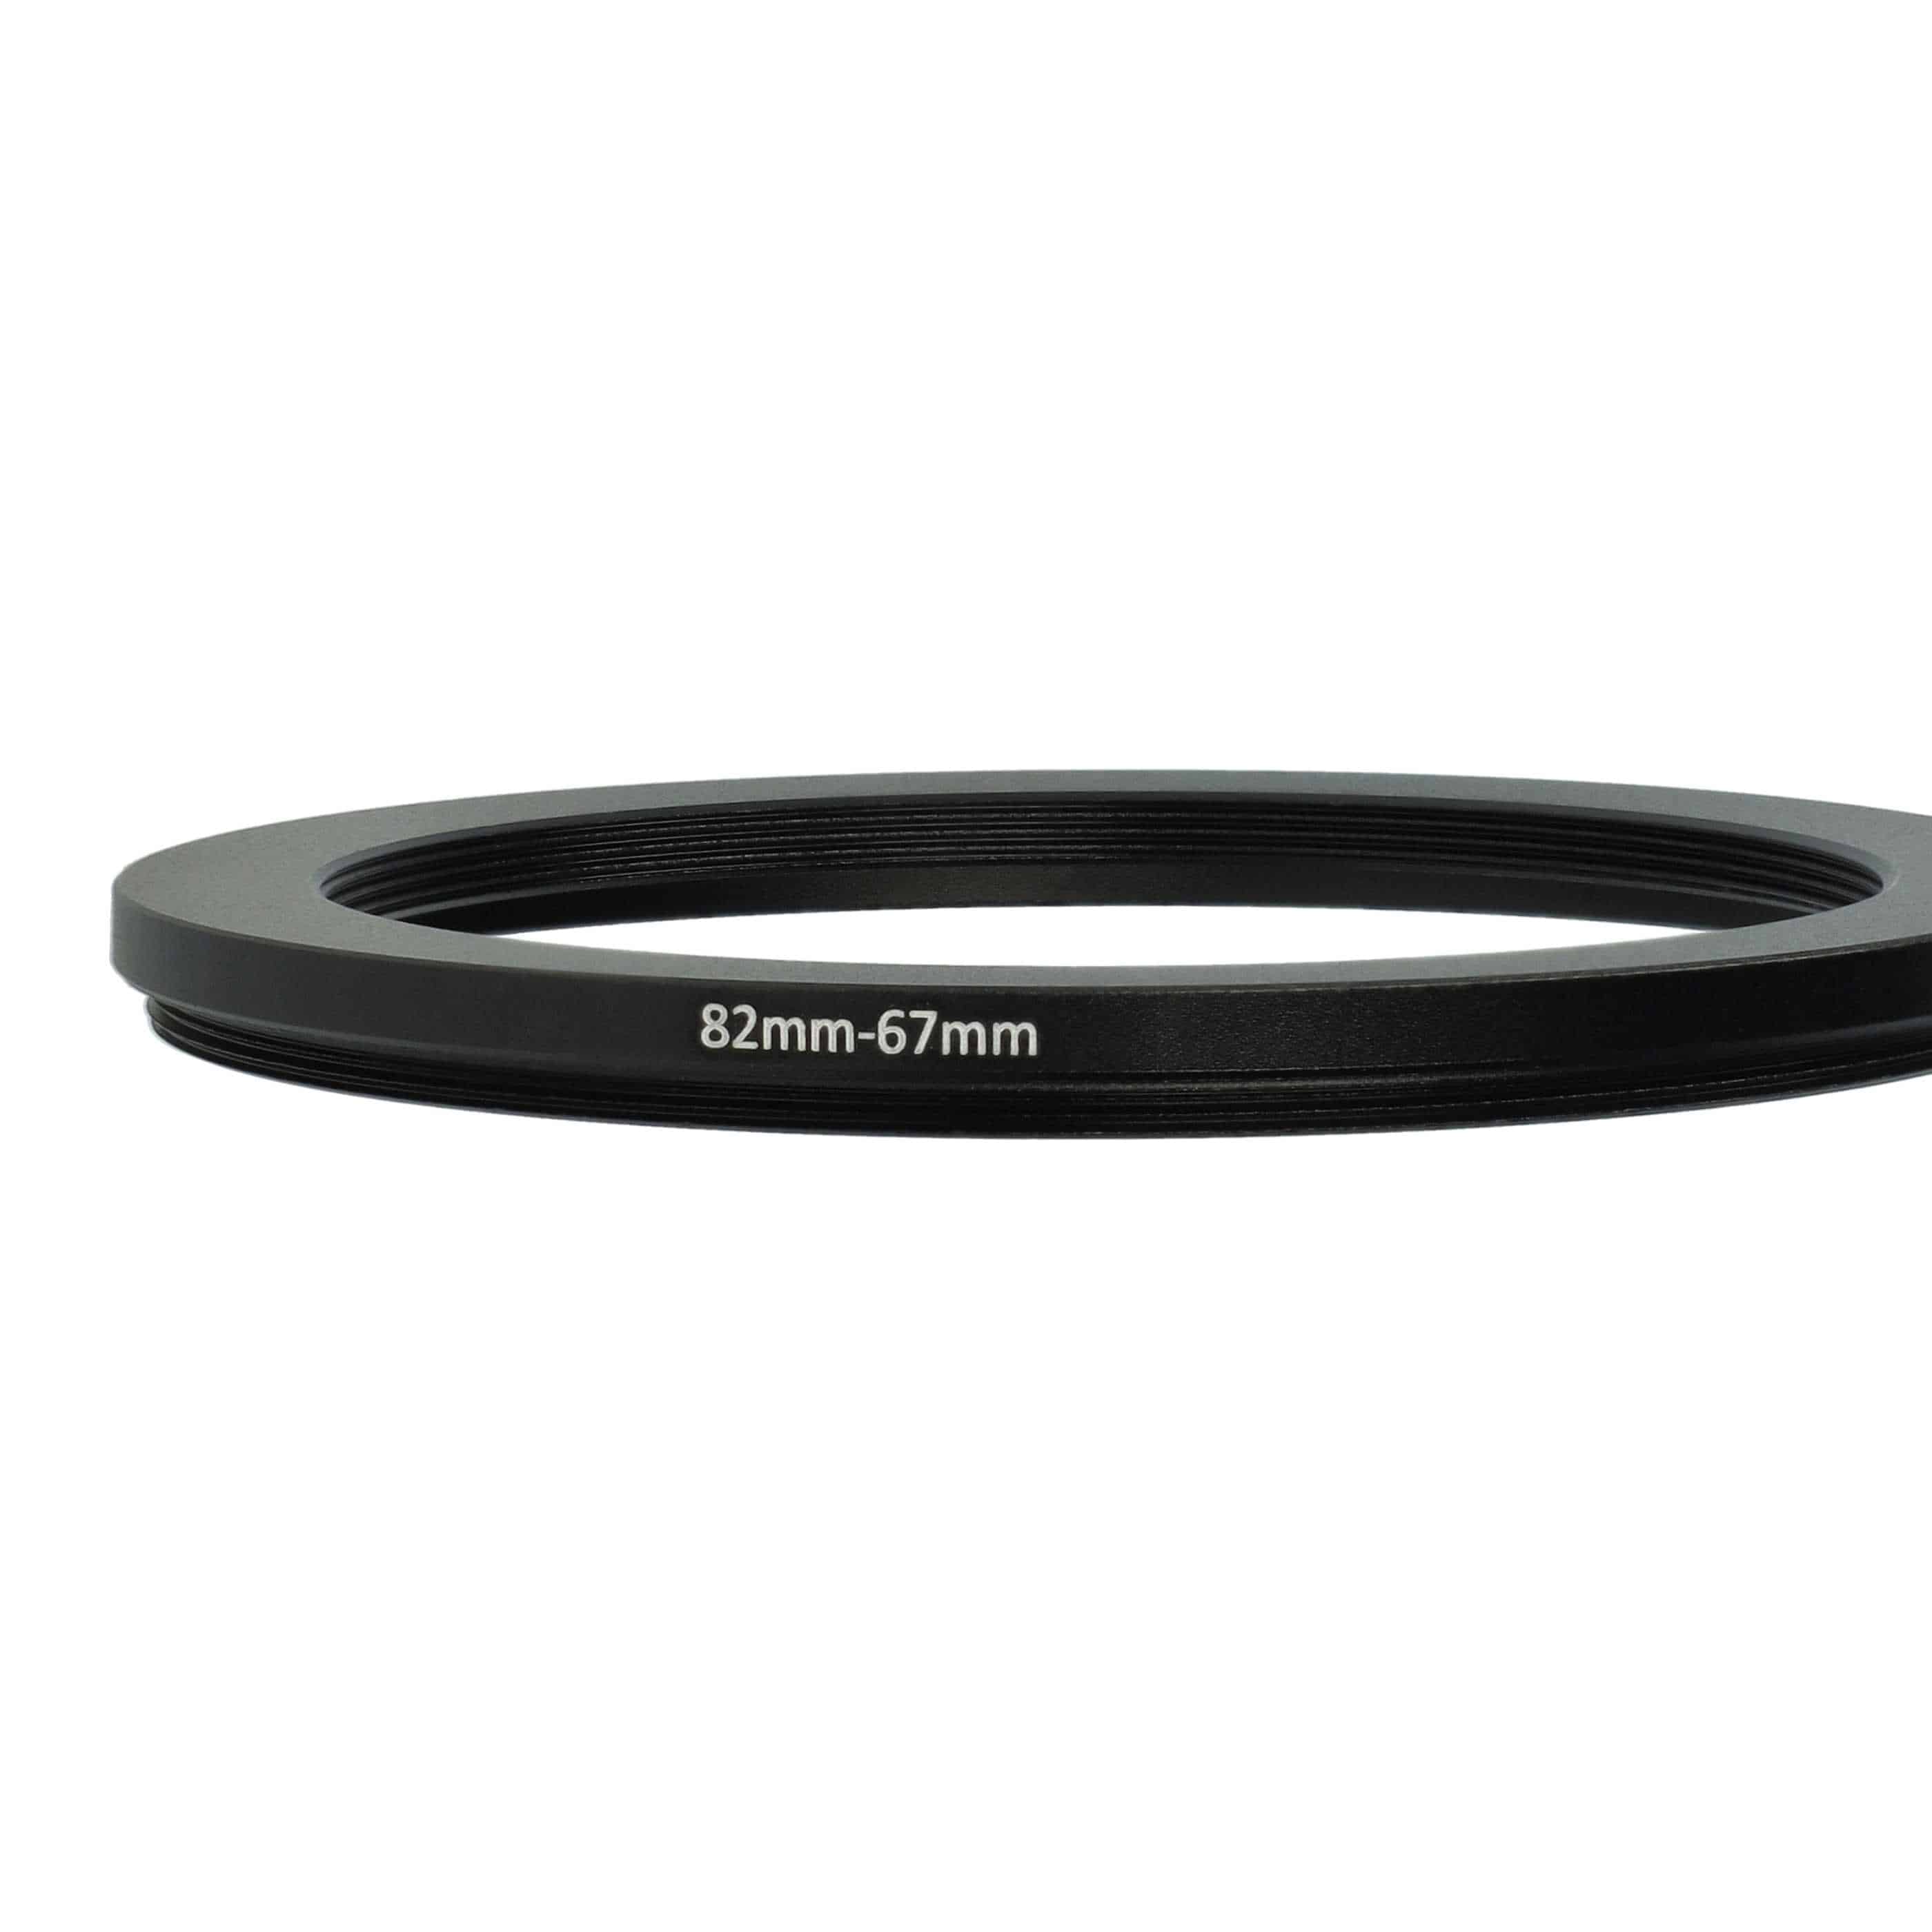 Step-Down Ring Adapter from 82 mm to 67 mm suitable for Camera Lens - Filter Adapter, metal